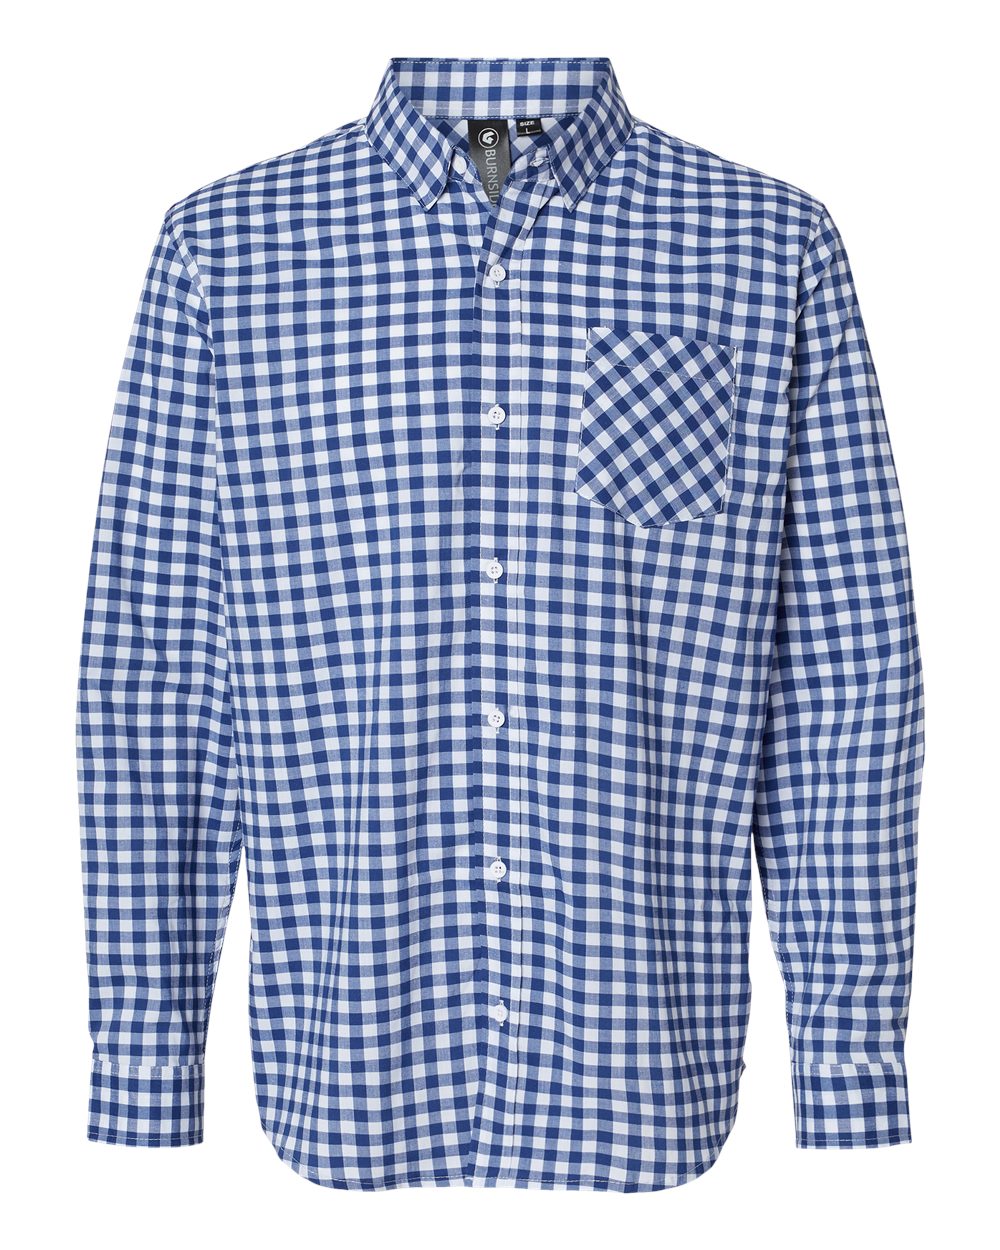 click to view Navy/ White Gingham